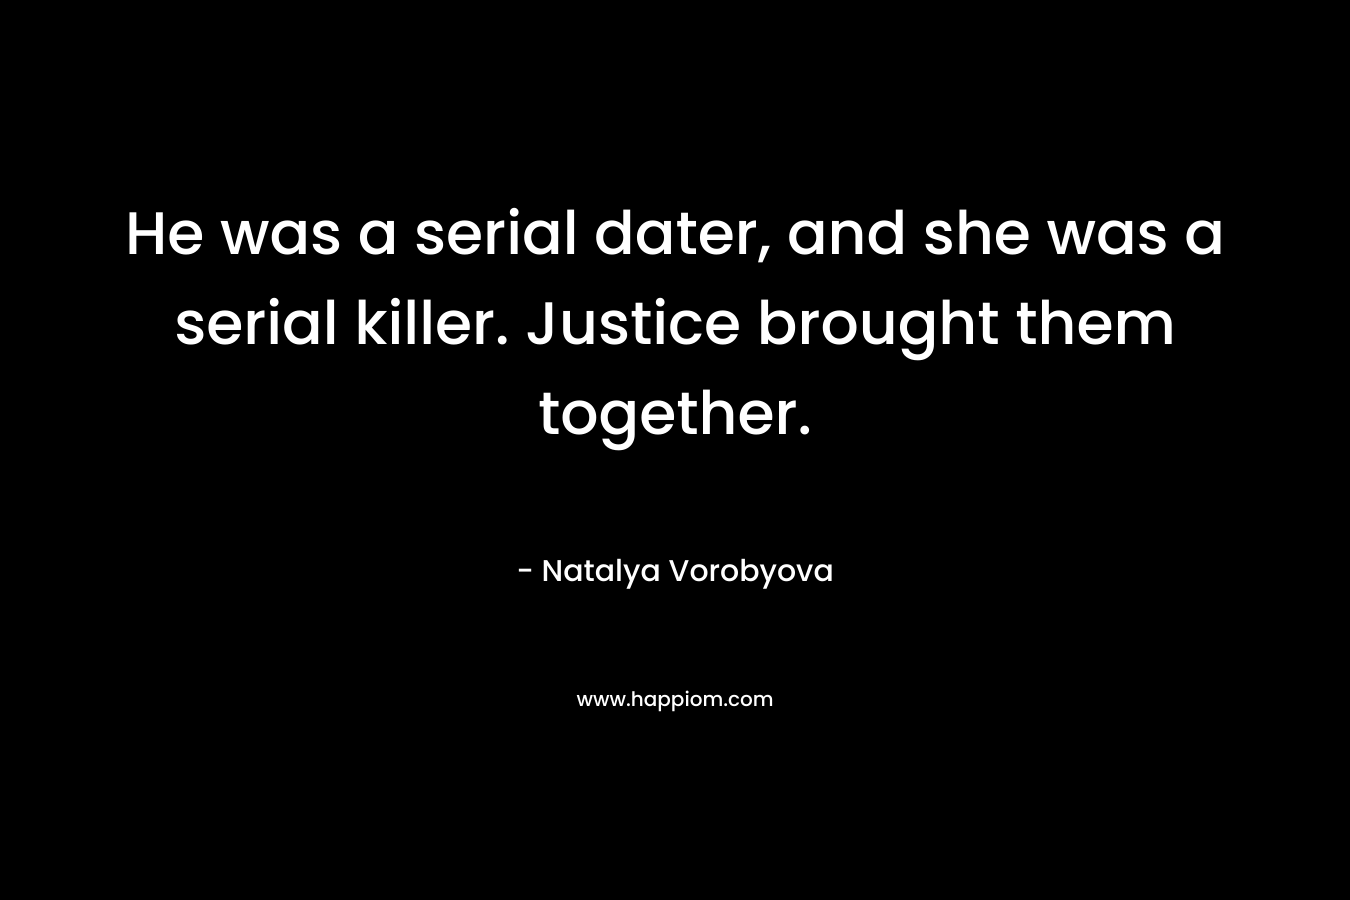 He was a serial dater, and she was a serial killer. Justice brought them together. – Natalya Vorobyova